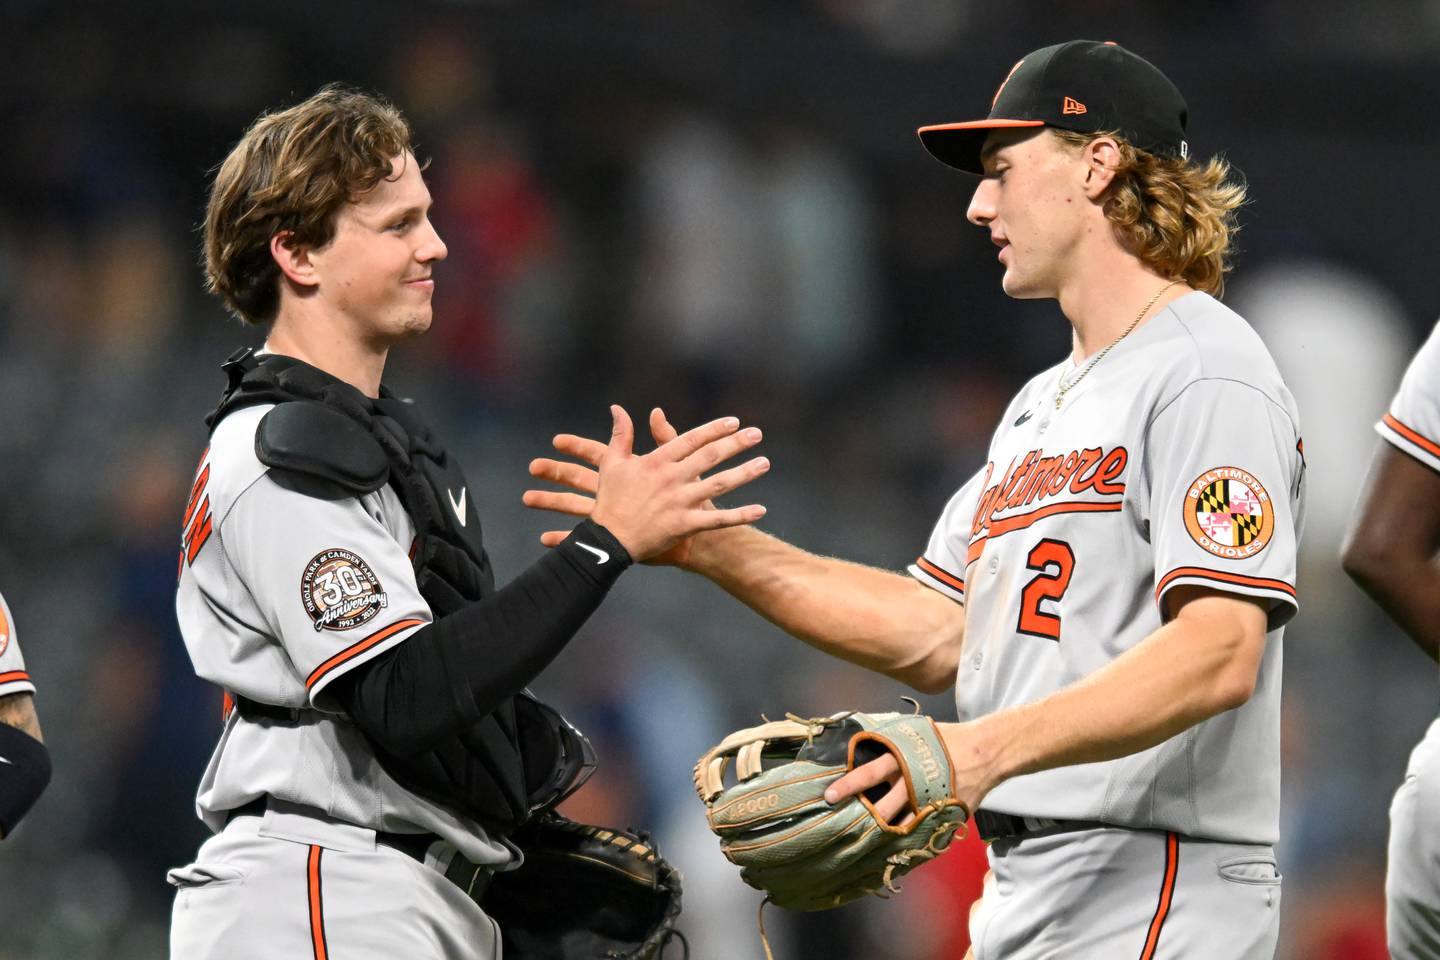 CLEVELAND, OH - AUGUST 31: Adley Rutschman #35 and Gunnar Henderson #2 of the Baltimore Orioles celebrate the team's 4-0 win over the Cleveland Guardians in Henderson's Major League debut at Progressive Field on August 31, 2022 in Cleveland, Ohio.